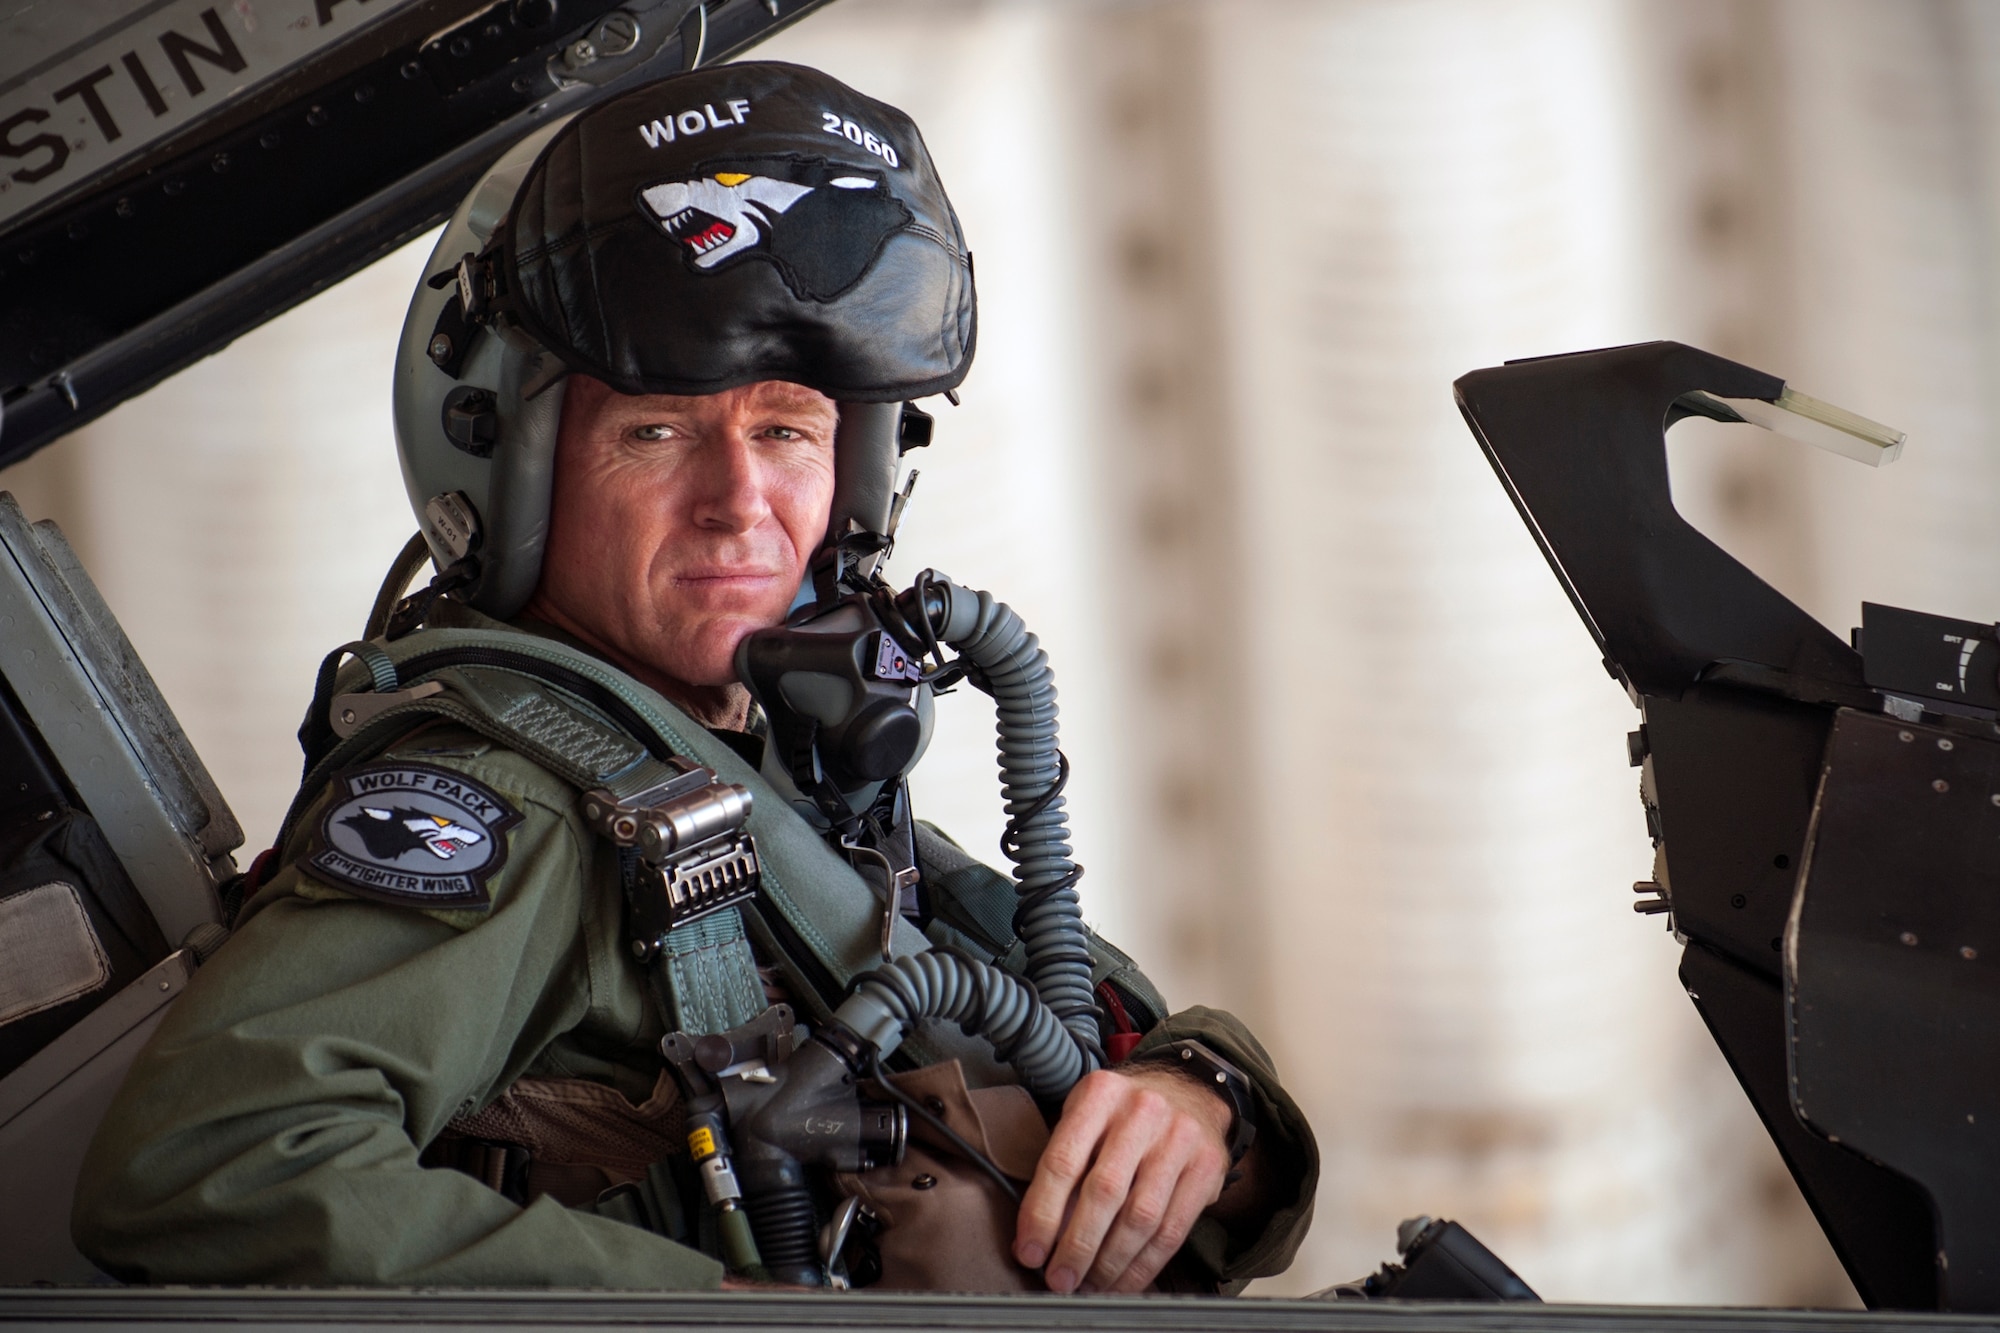 Col. Ken “Wolf” Ekman, 8th Fighter Wing commander, prepares for his flight in an F-16 Fighting Falcon at Kunsan Air Base, Republic of Korea, Sept. 10, 2014. The F-16 is being flown to Osan AB to temporarily operate flying missions while the runway at Kunsan is under construction for repairs. (U.S. Air Force photo by Senior Airman Taylor Curry/Released)